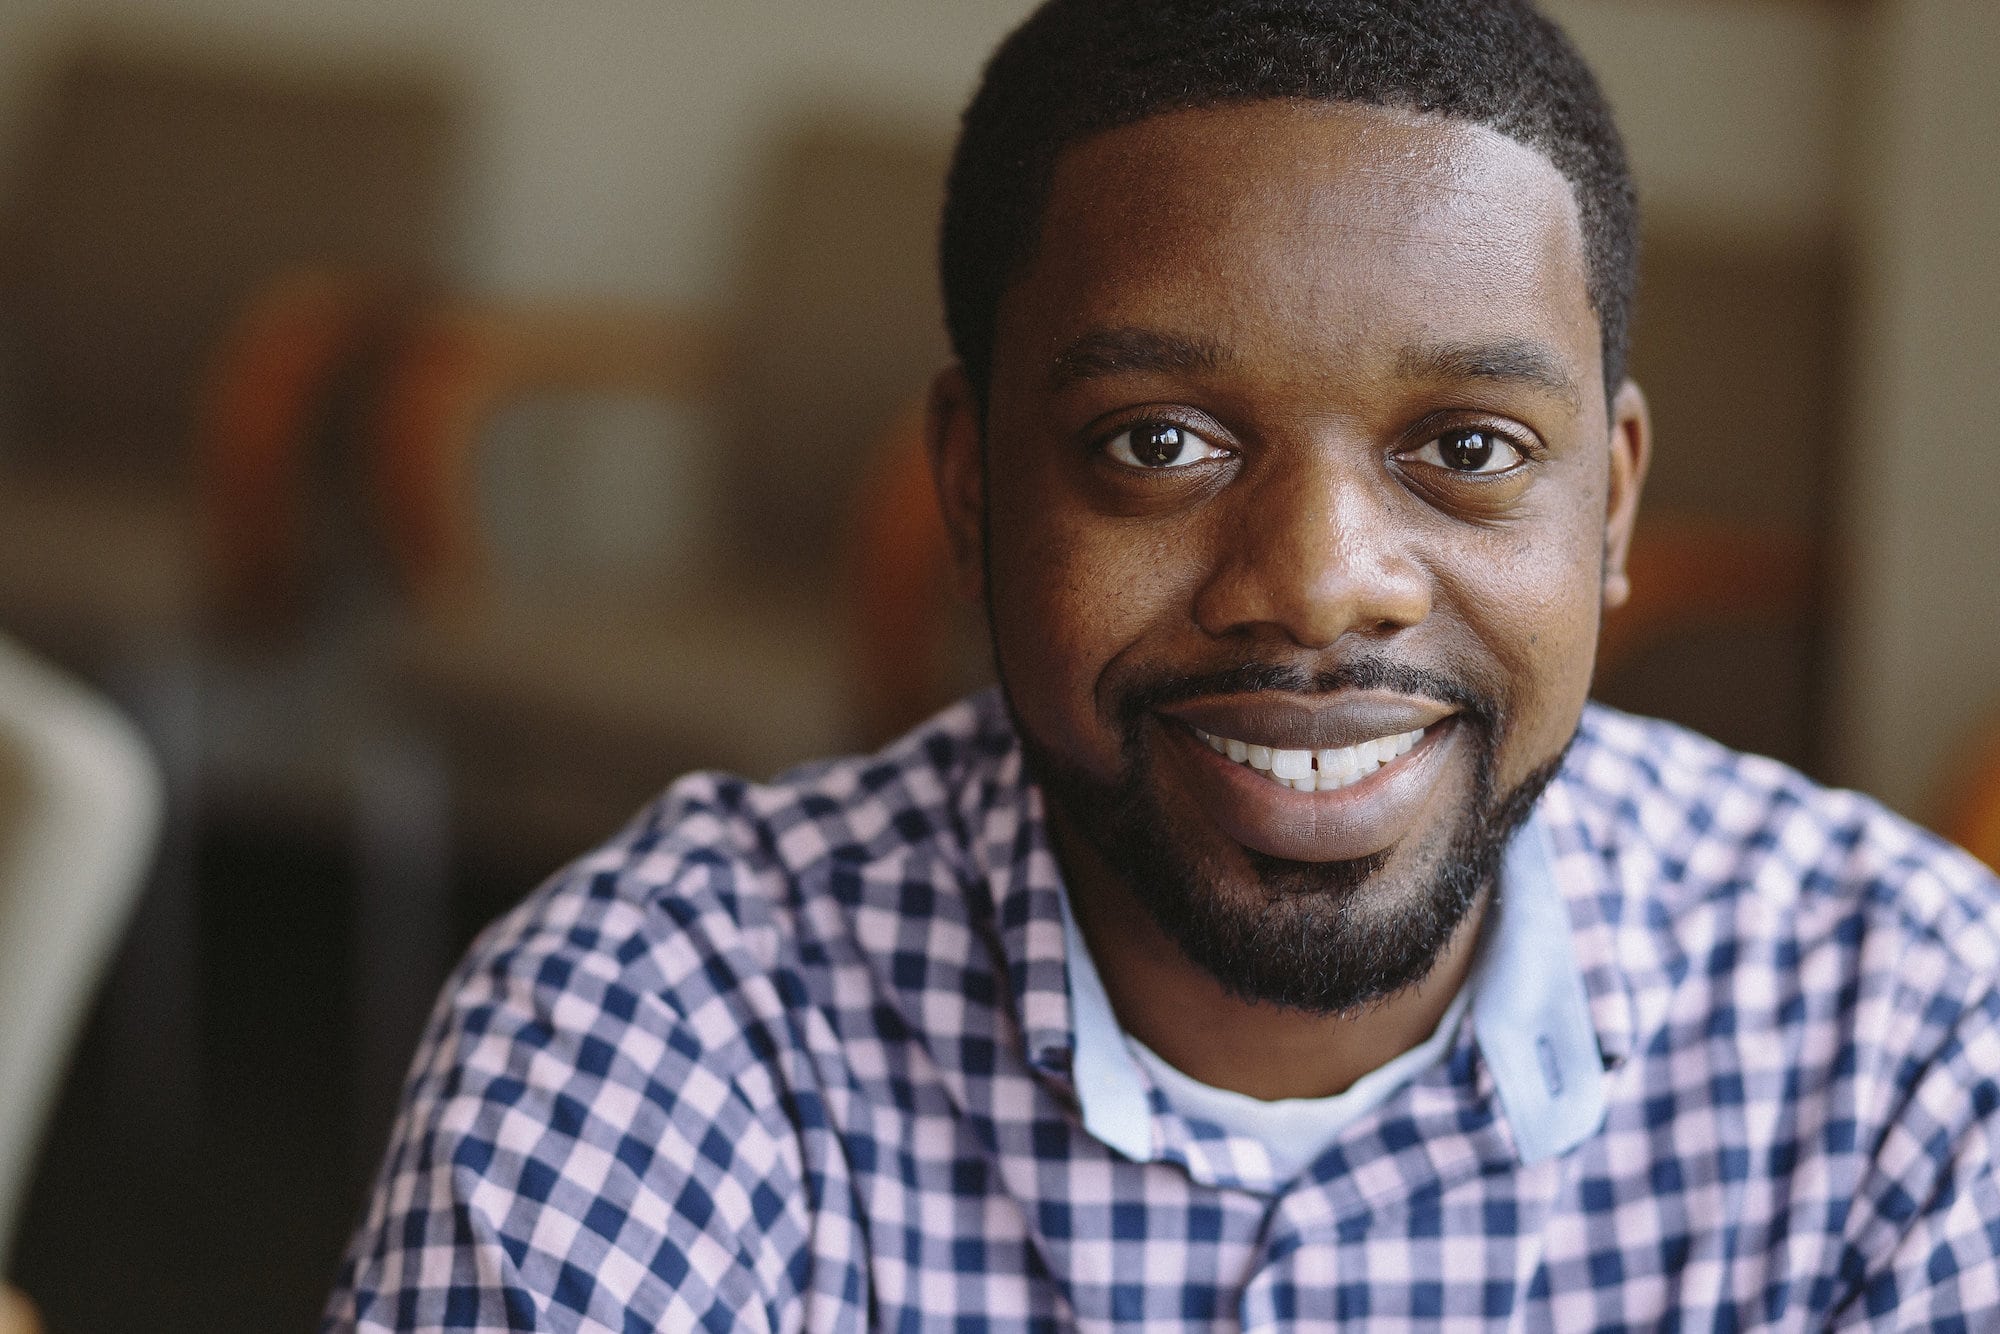 From Y Combinator to $107 Million Raised: Fundraising Secrets from a Black Founder